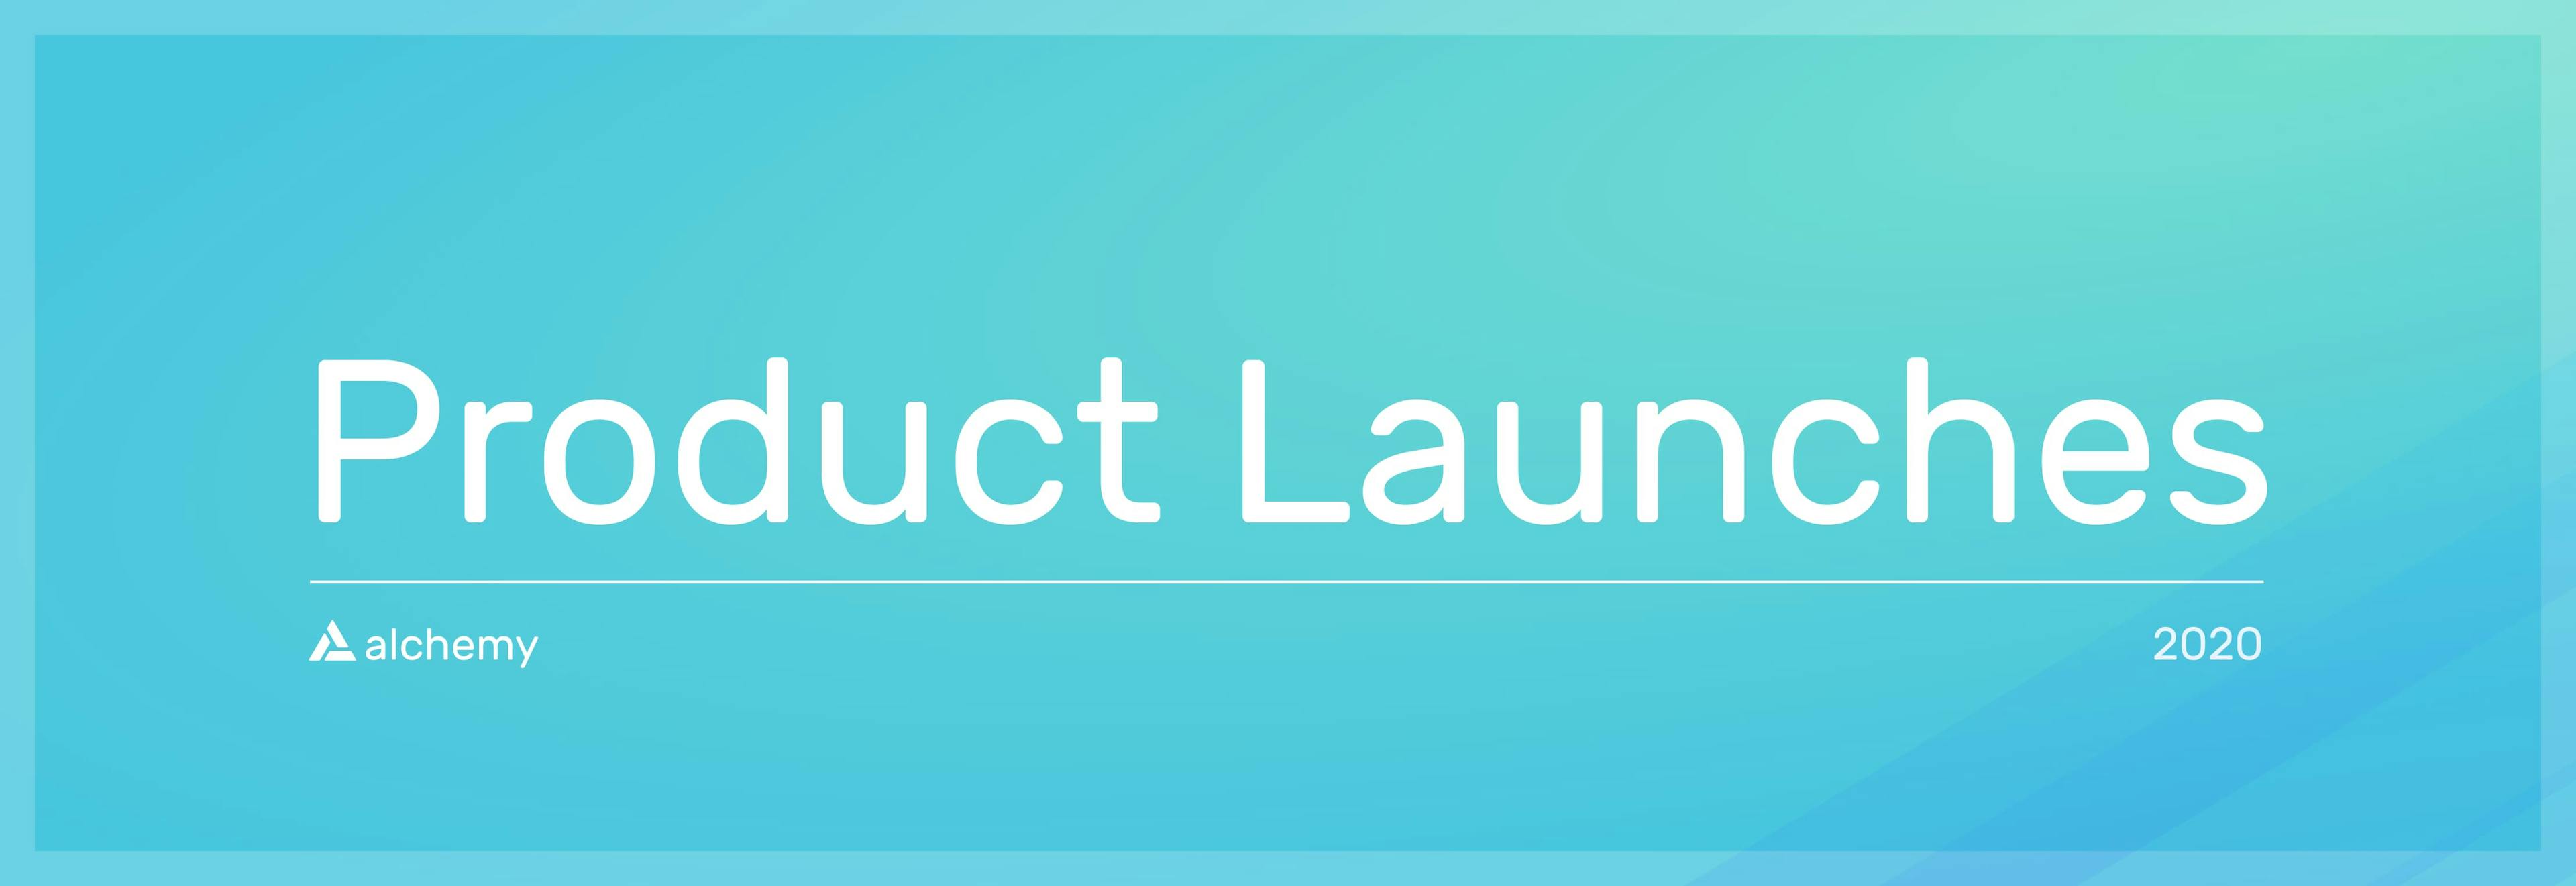 Product launches 2020